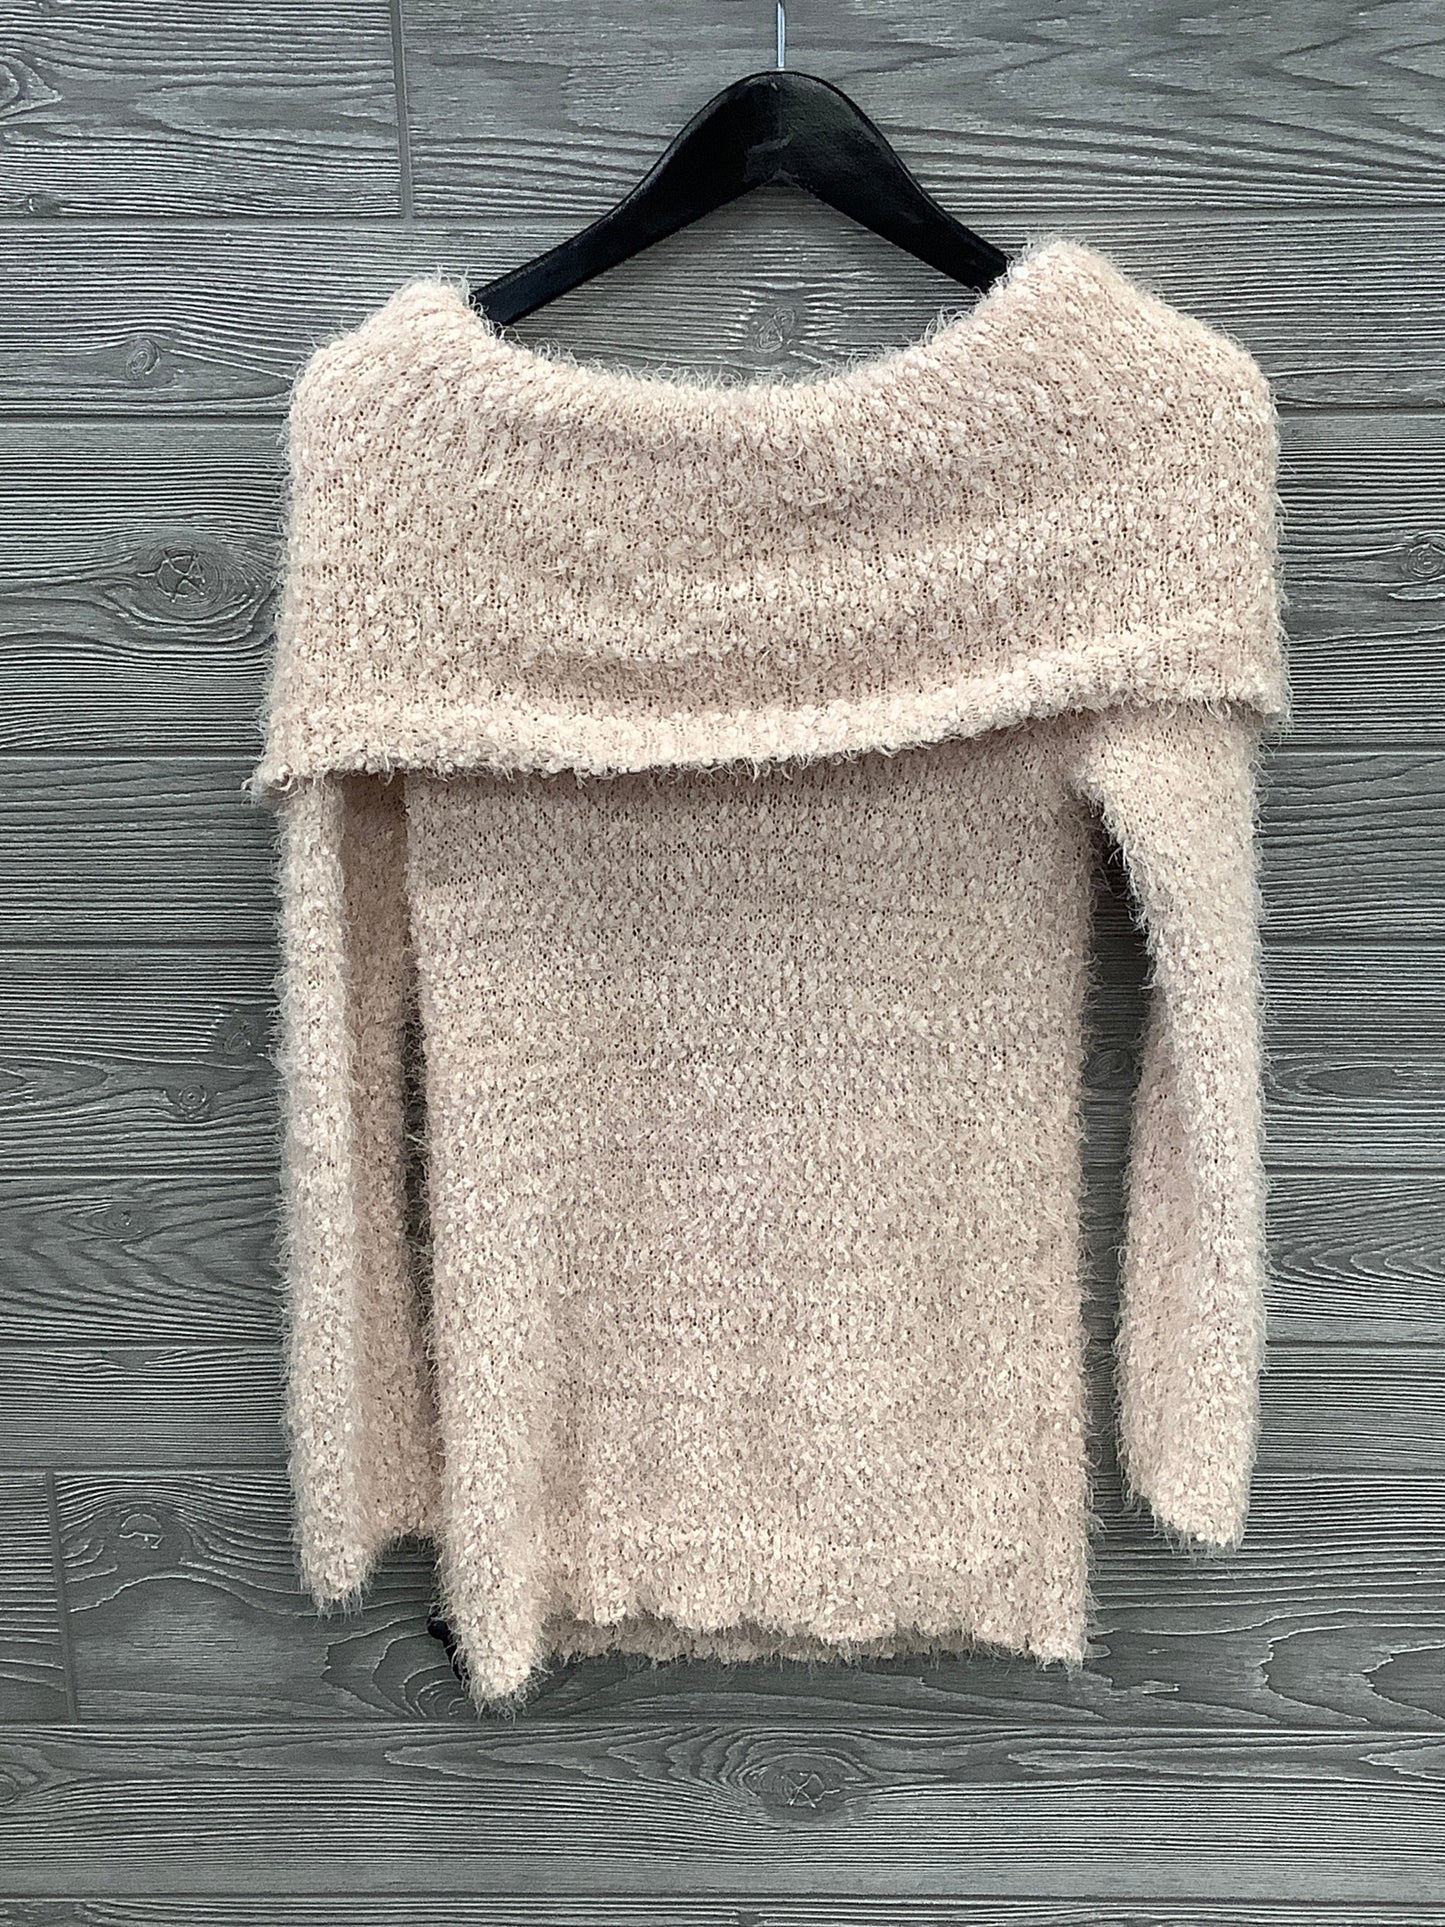 Sweater By Lc Lauren Conrad  Size: M